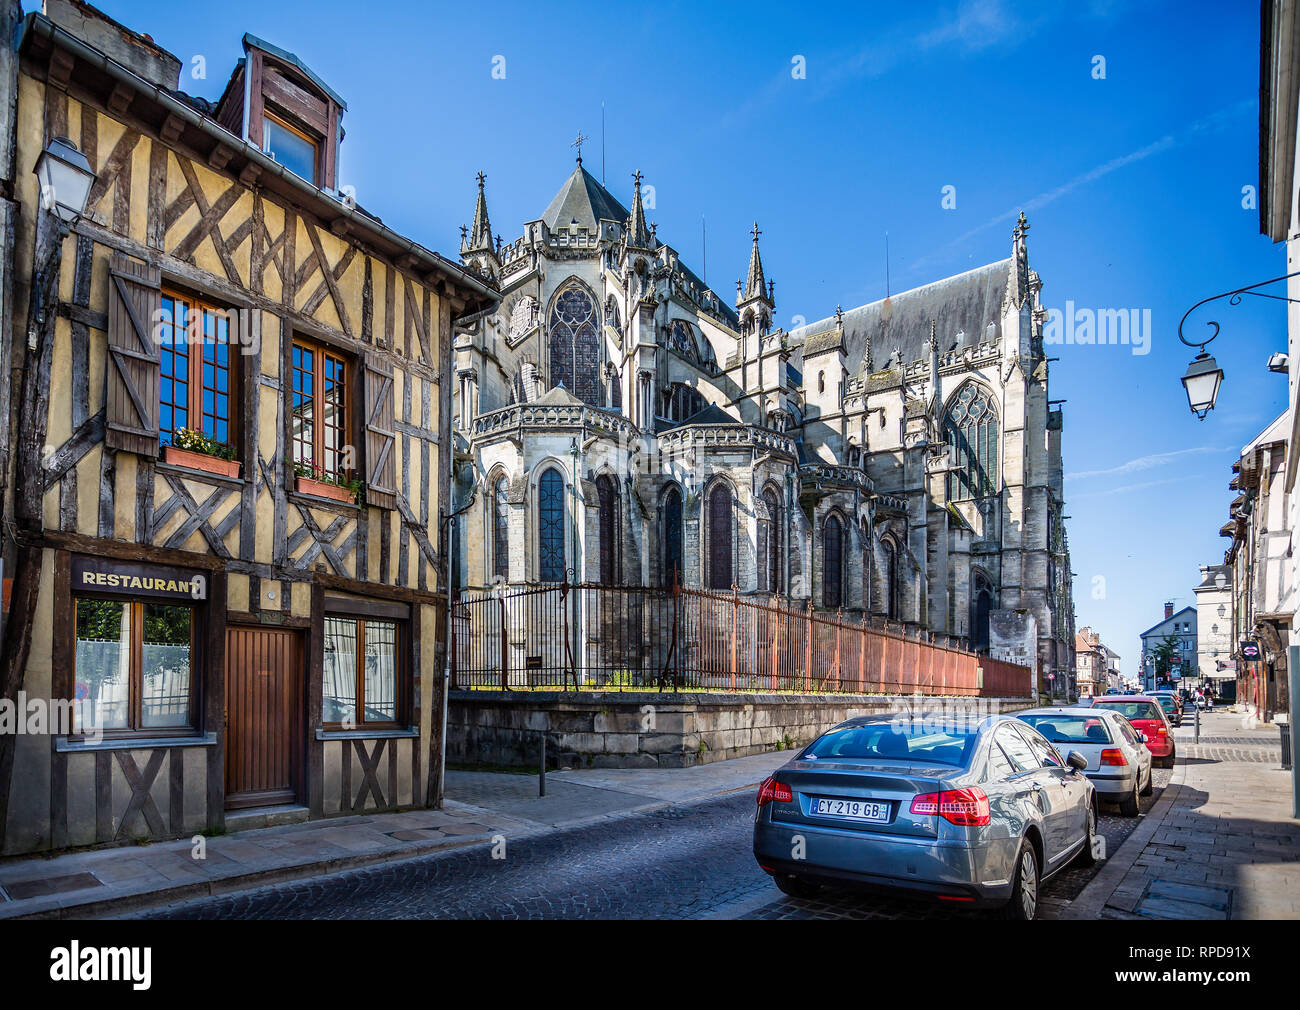 Troyes Cathedral - rear view and timber framed medieval buildings taken in Troyes, France on 8 June 2015 Stock Photo